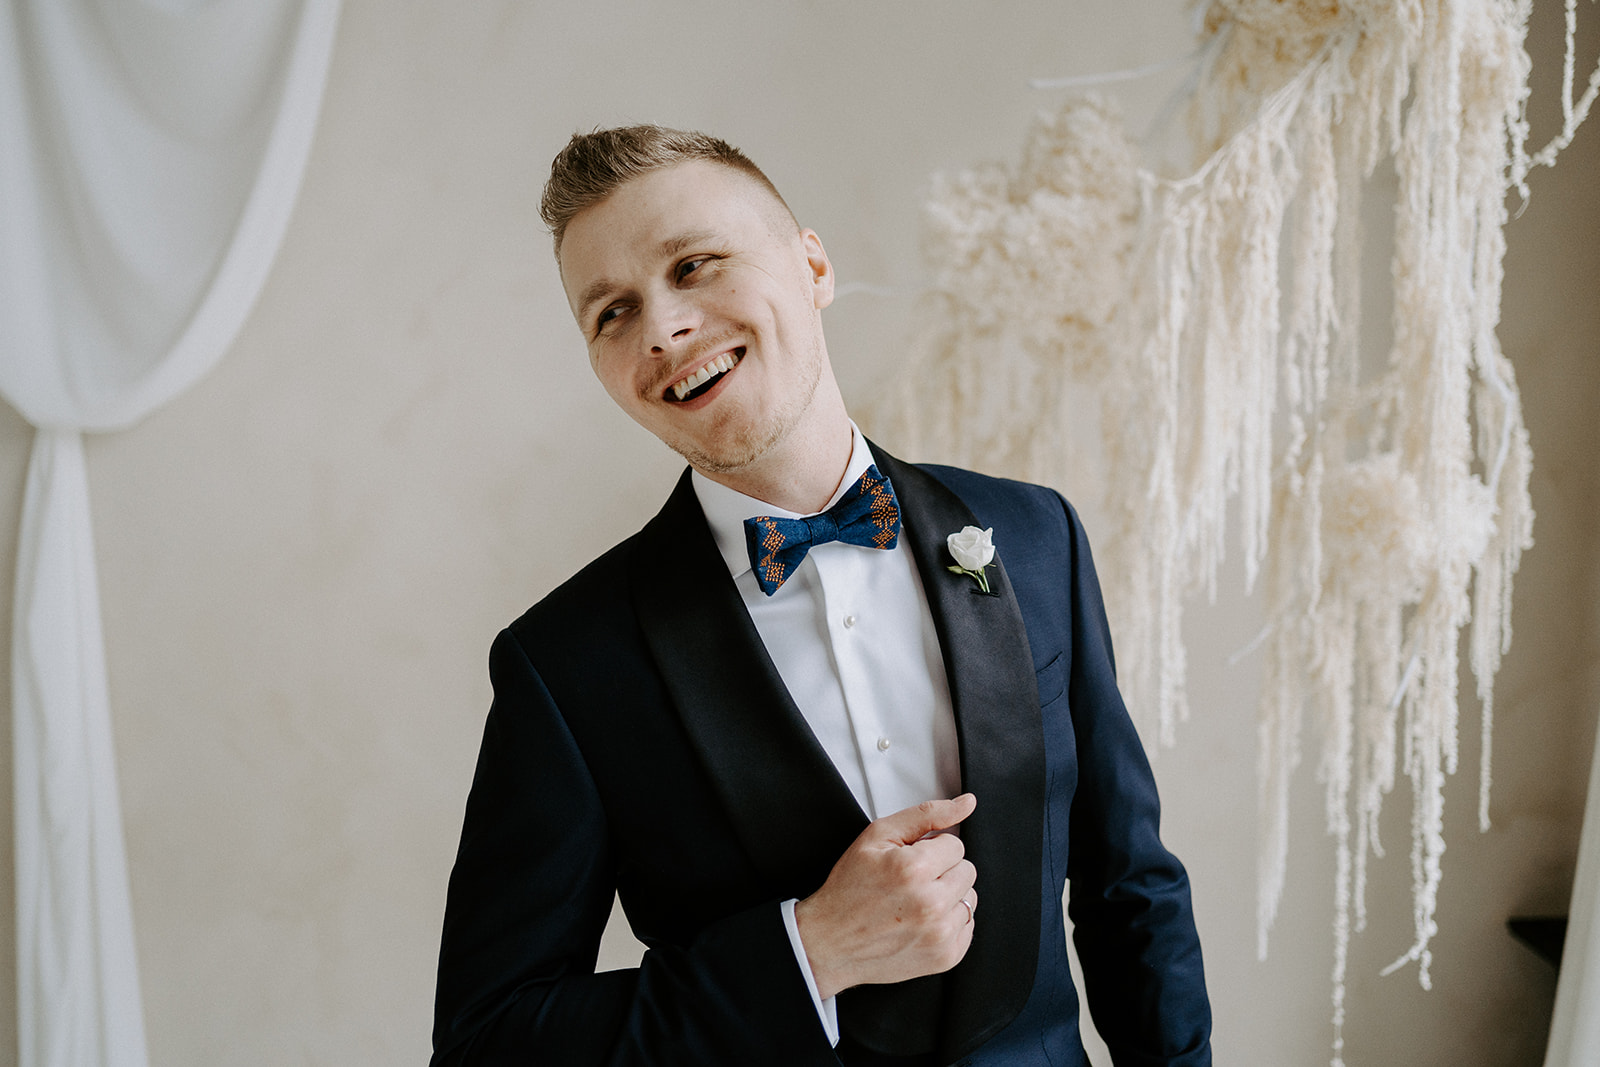 A portrait of the groom.